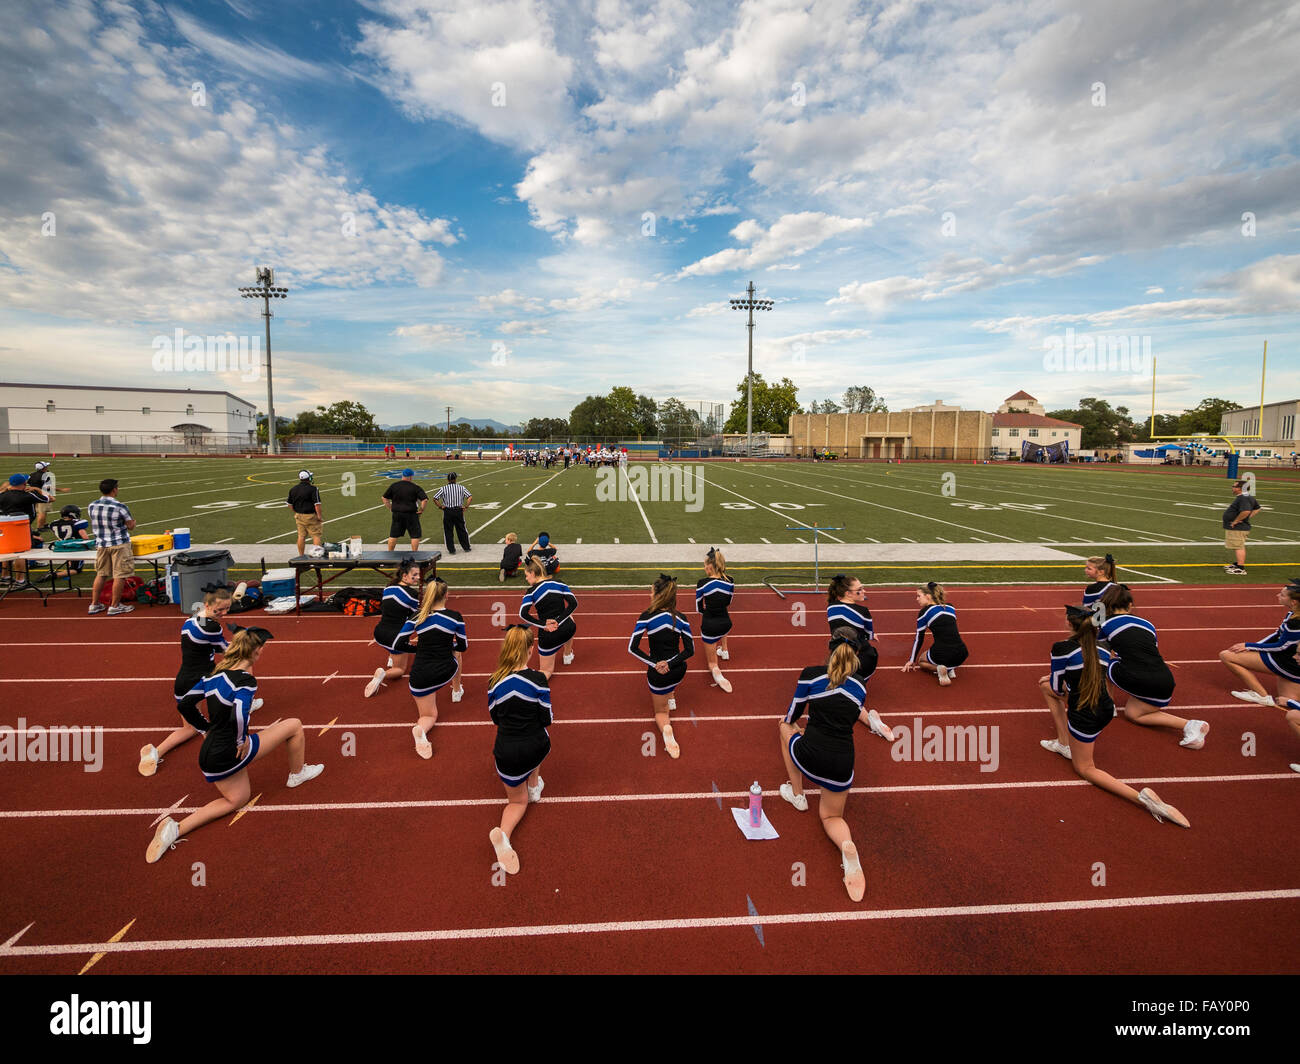 REDDING, CALIFORNIA, USA - OCTOBER 23, 2015: Teenage cheerleaders kneel during a time out at high school football game. Stock Photo